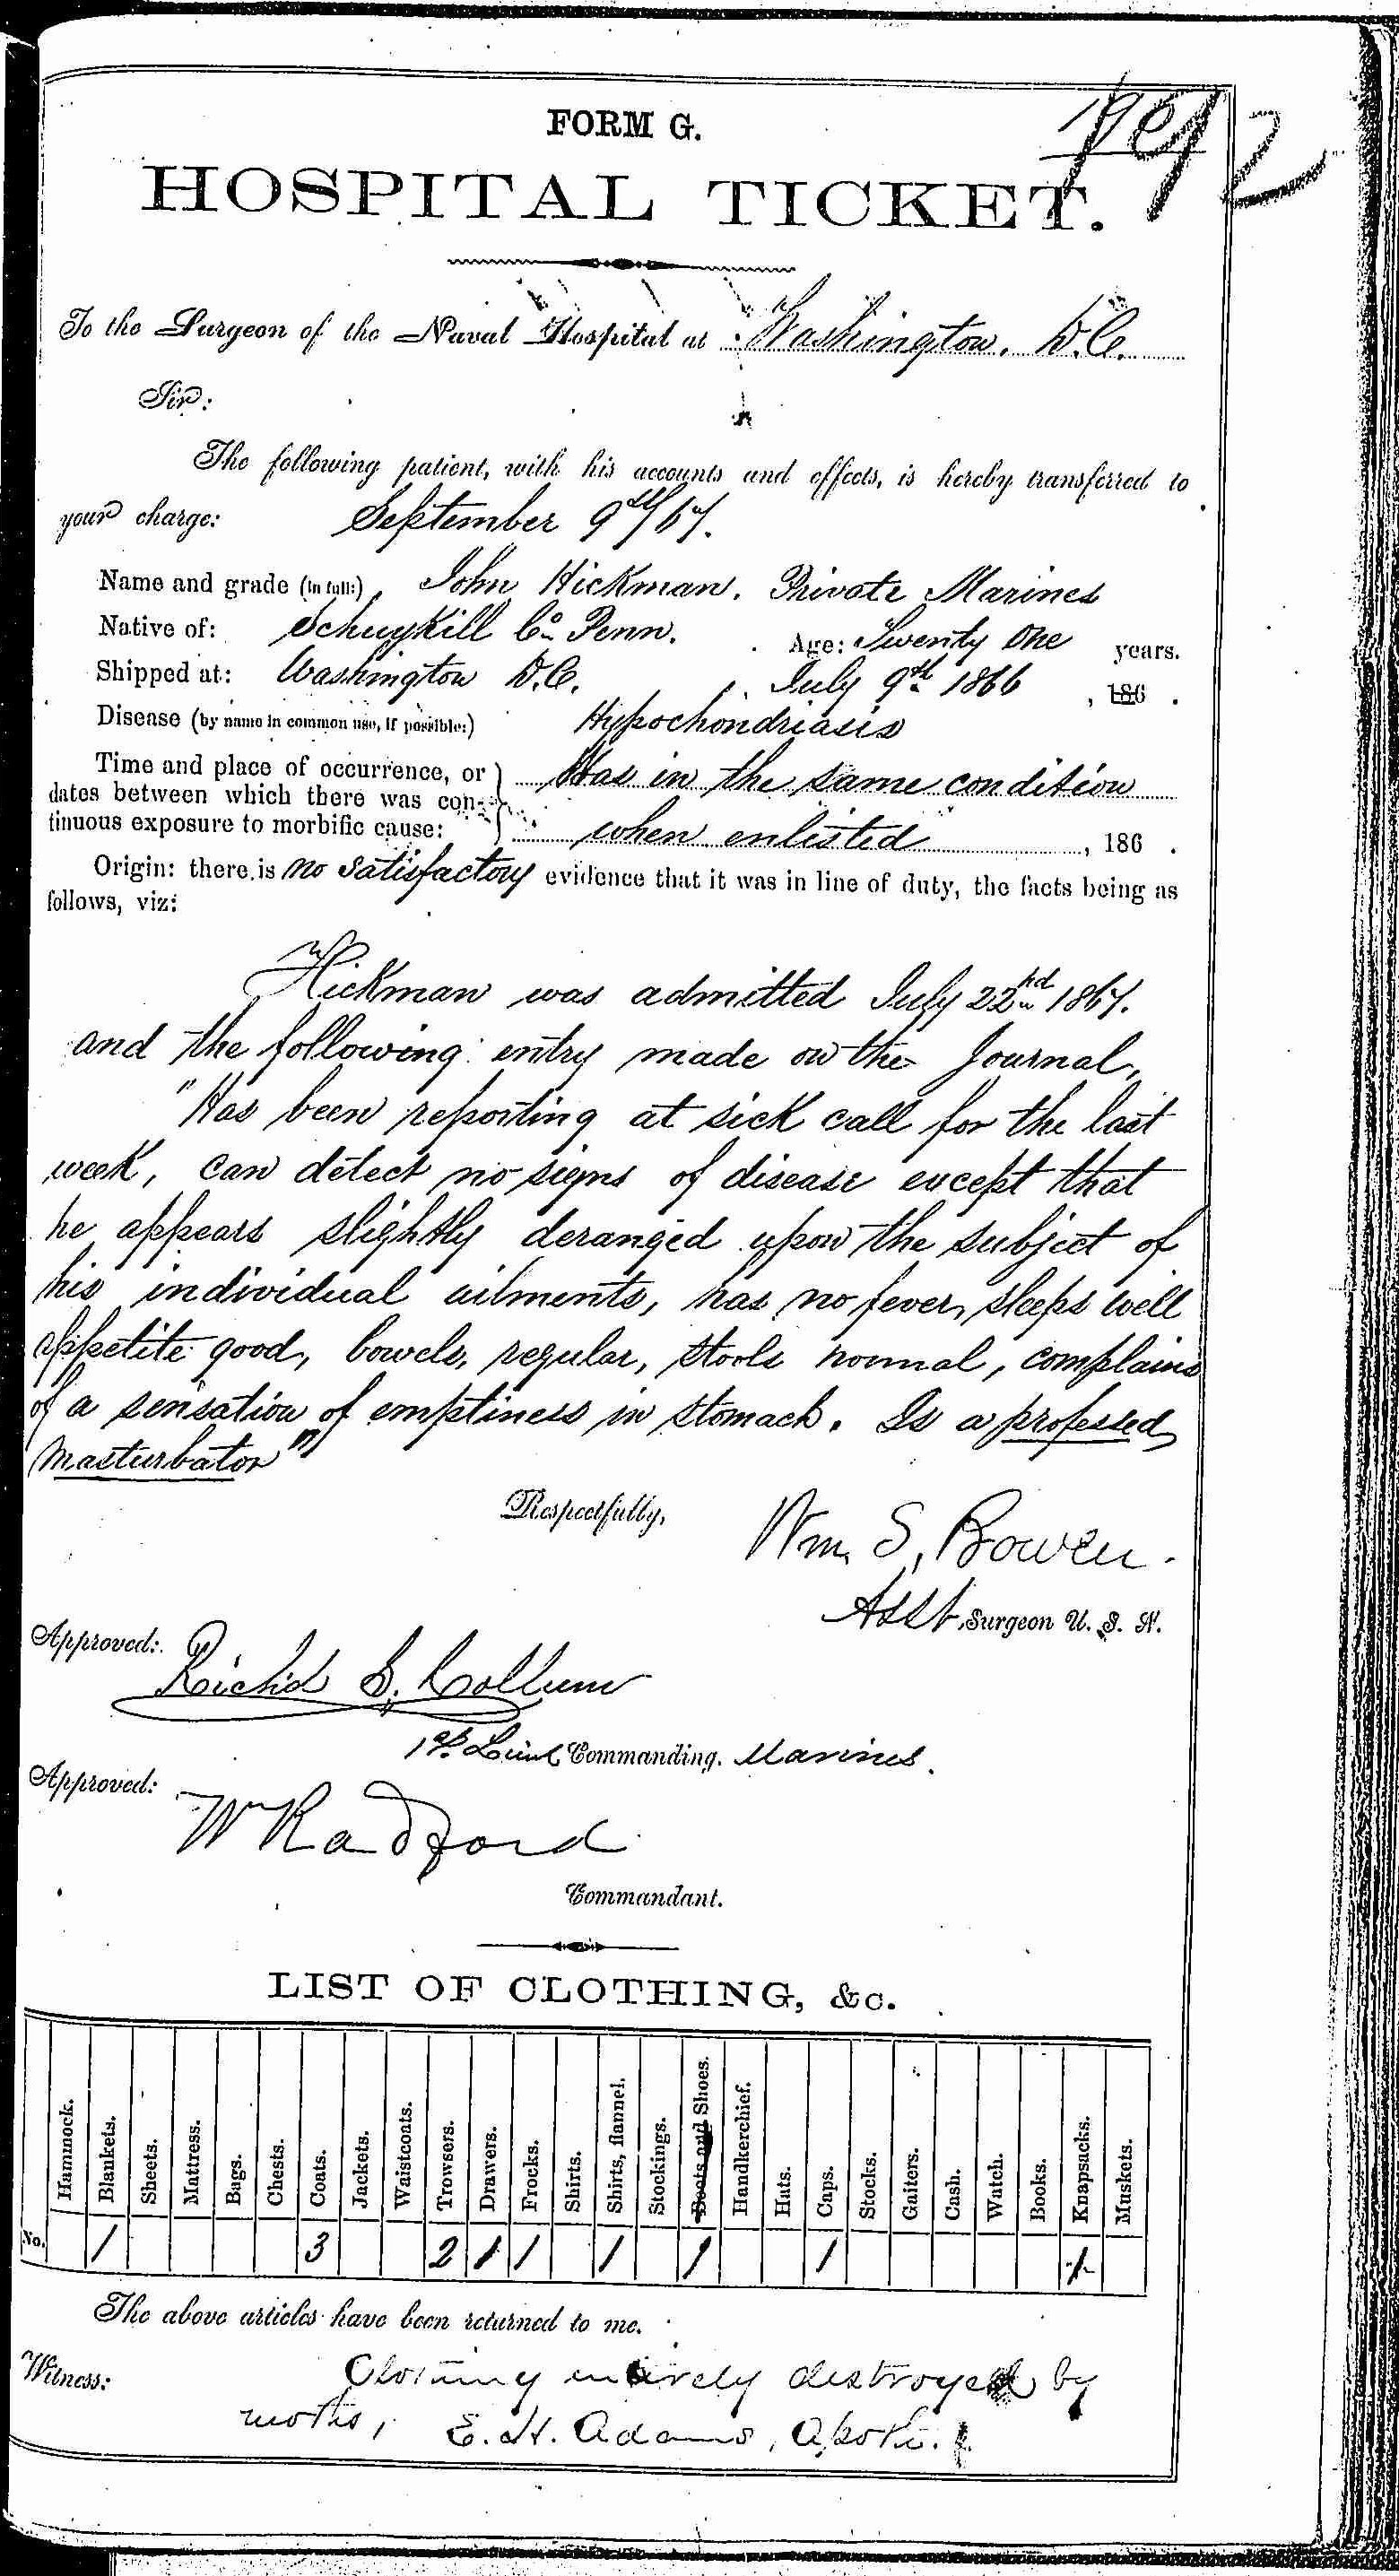 Entry for John Hickman (page 1 of 2) in the log Hospital Tickets and Case Papers - Naval Hospital - Washington, D.C. - 1866-68